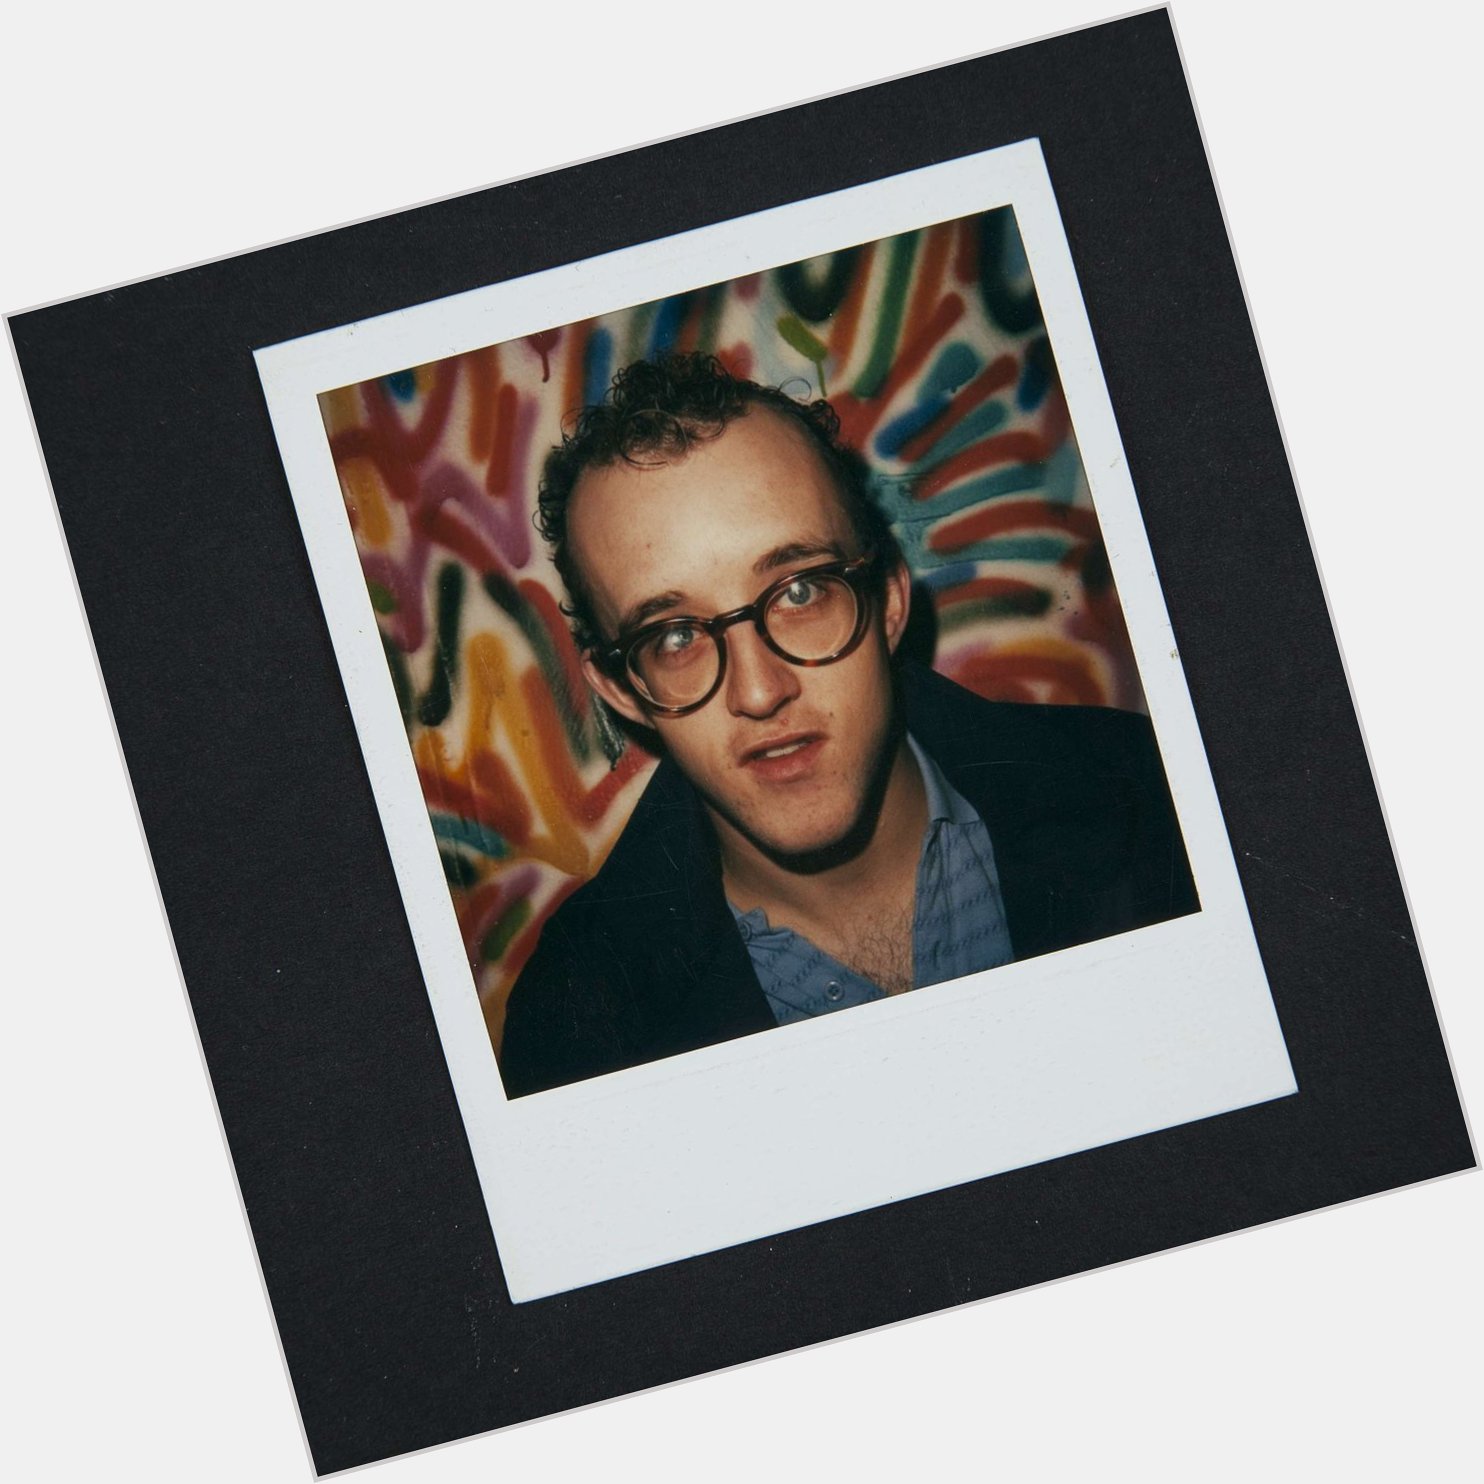   Wishing a happy birthday to Keith Haring on what would have been the artist\s 63rd birthday  